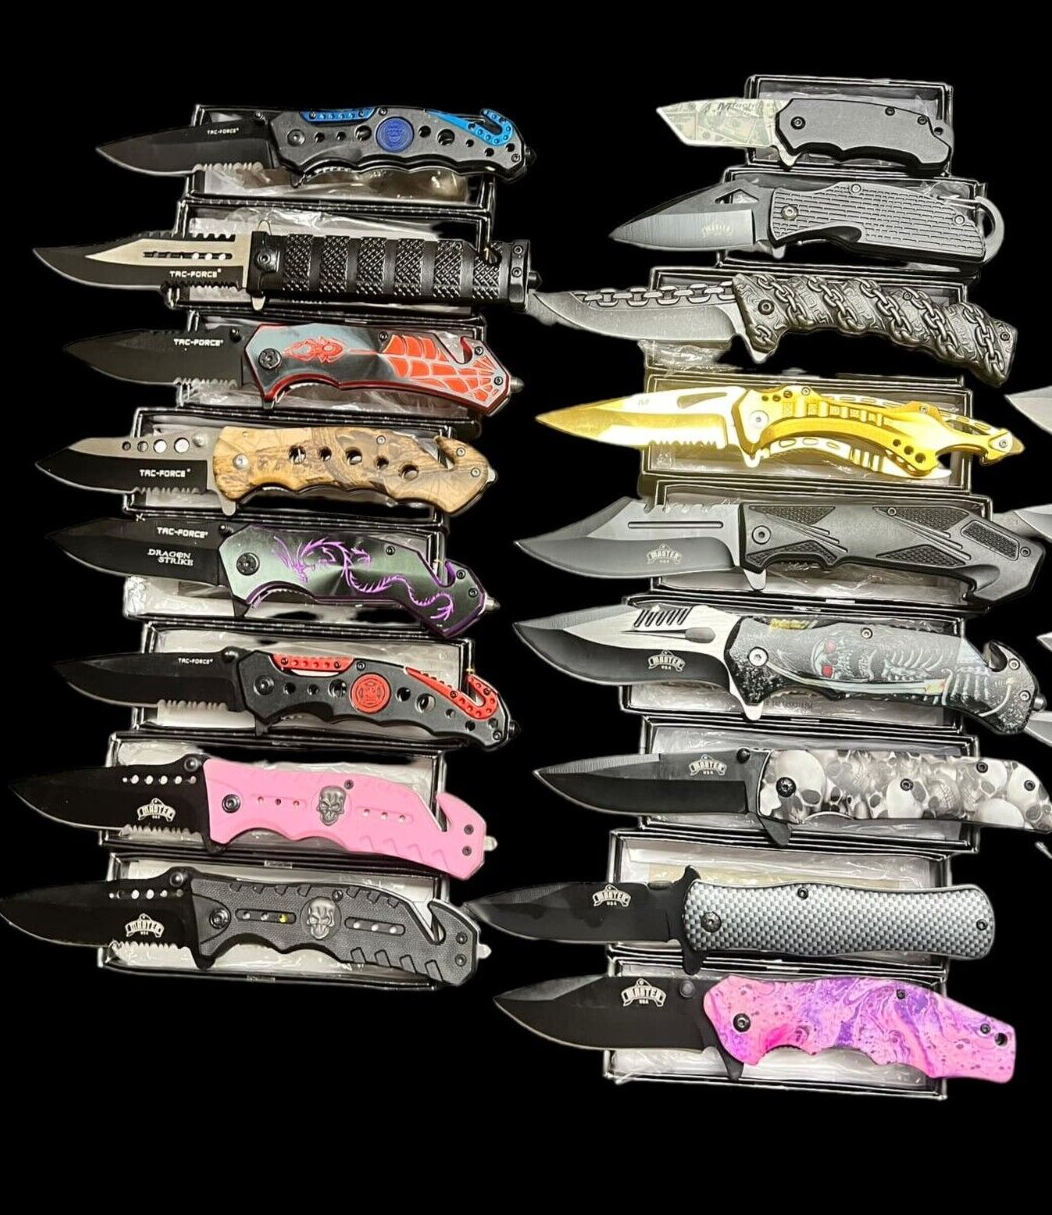 LOT OF 45 Spring Assisted pocket knife Collectible Design Wholesale Knives AS-IS Без бренда - фотография #8